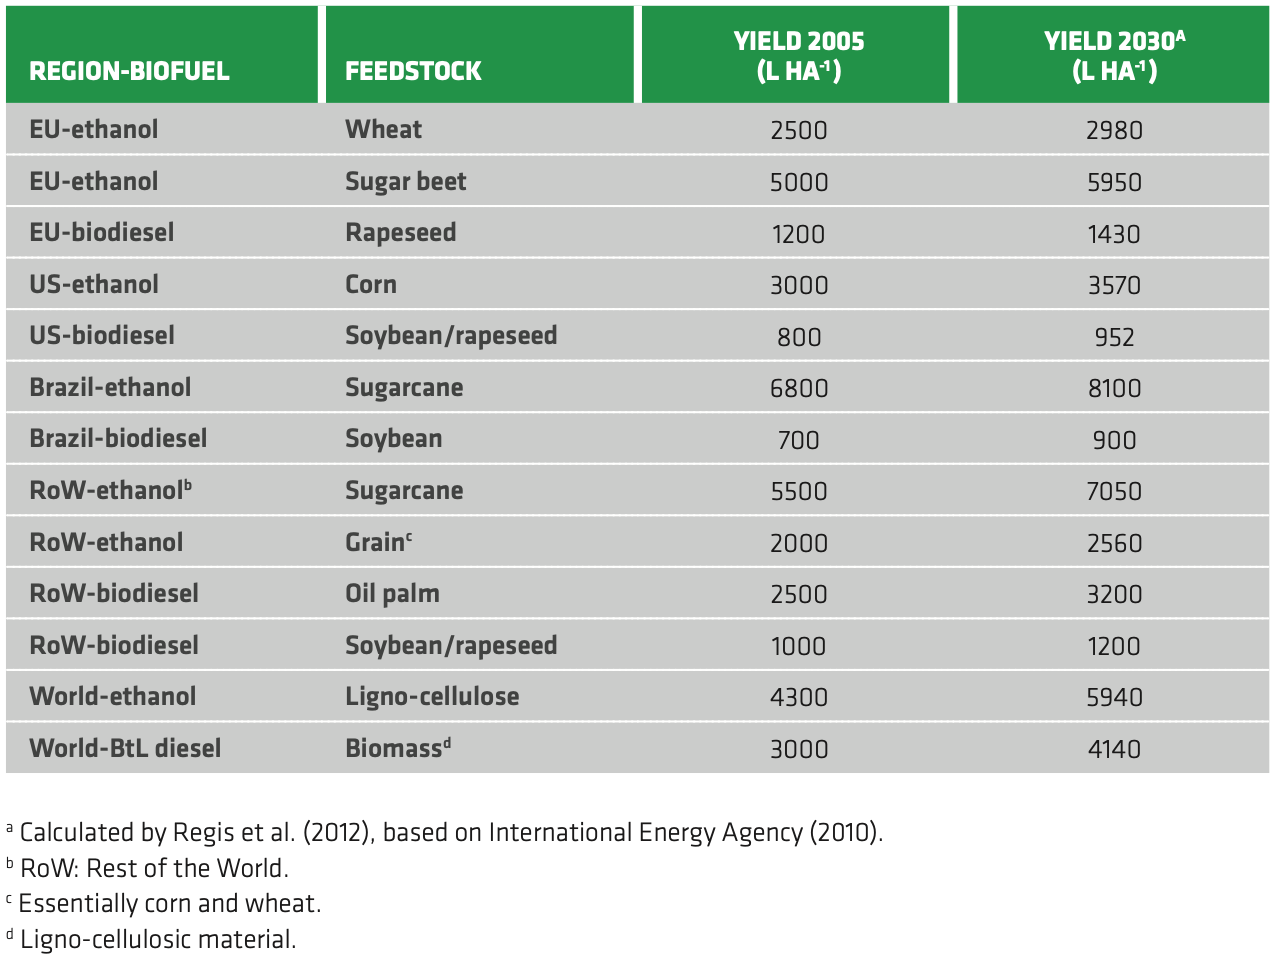 TABLE 3.2 Biofuel Past and Future Yields 2005-2030 (IEA)